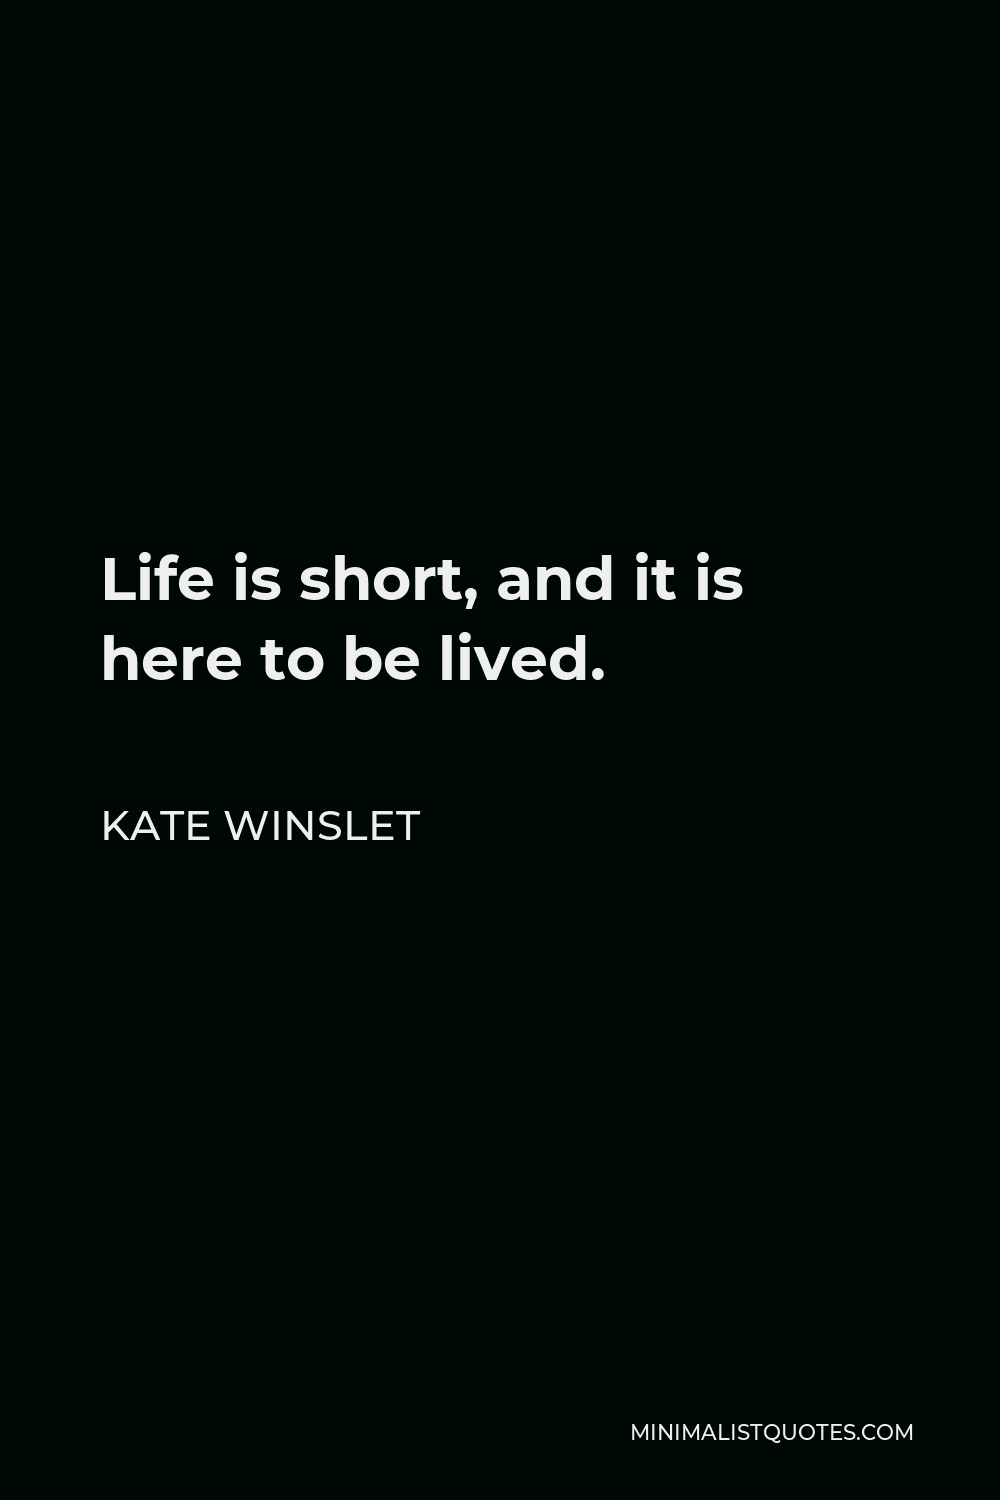 Kate Winslet Quote - Life is short, and it is here to be lived.